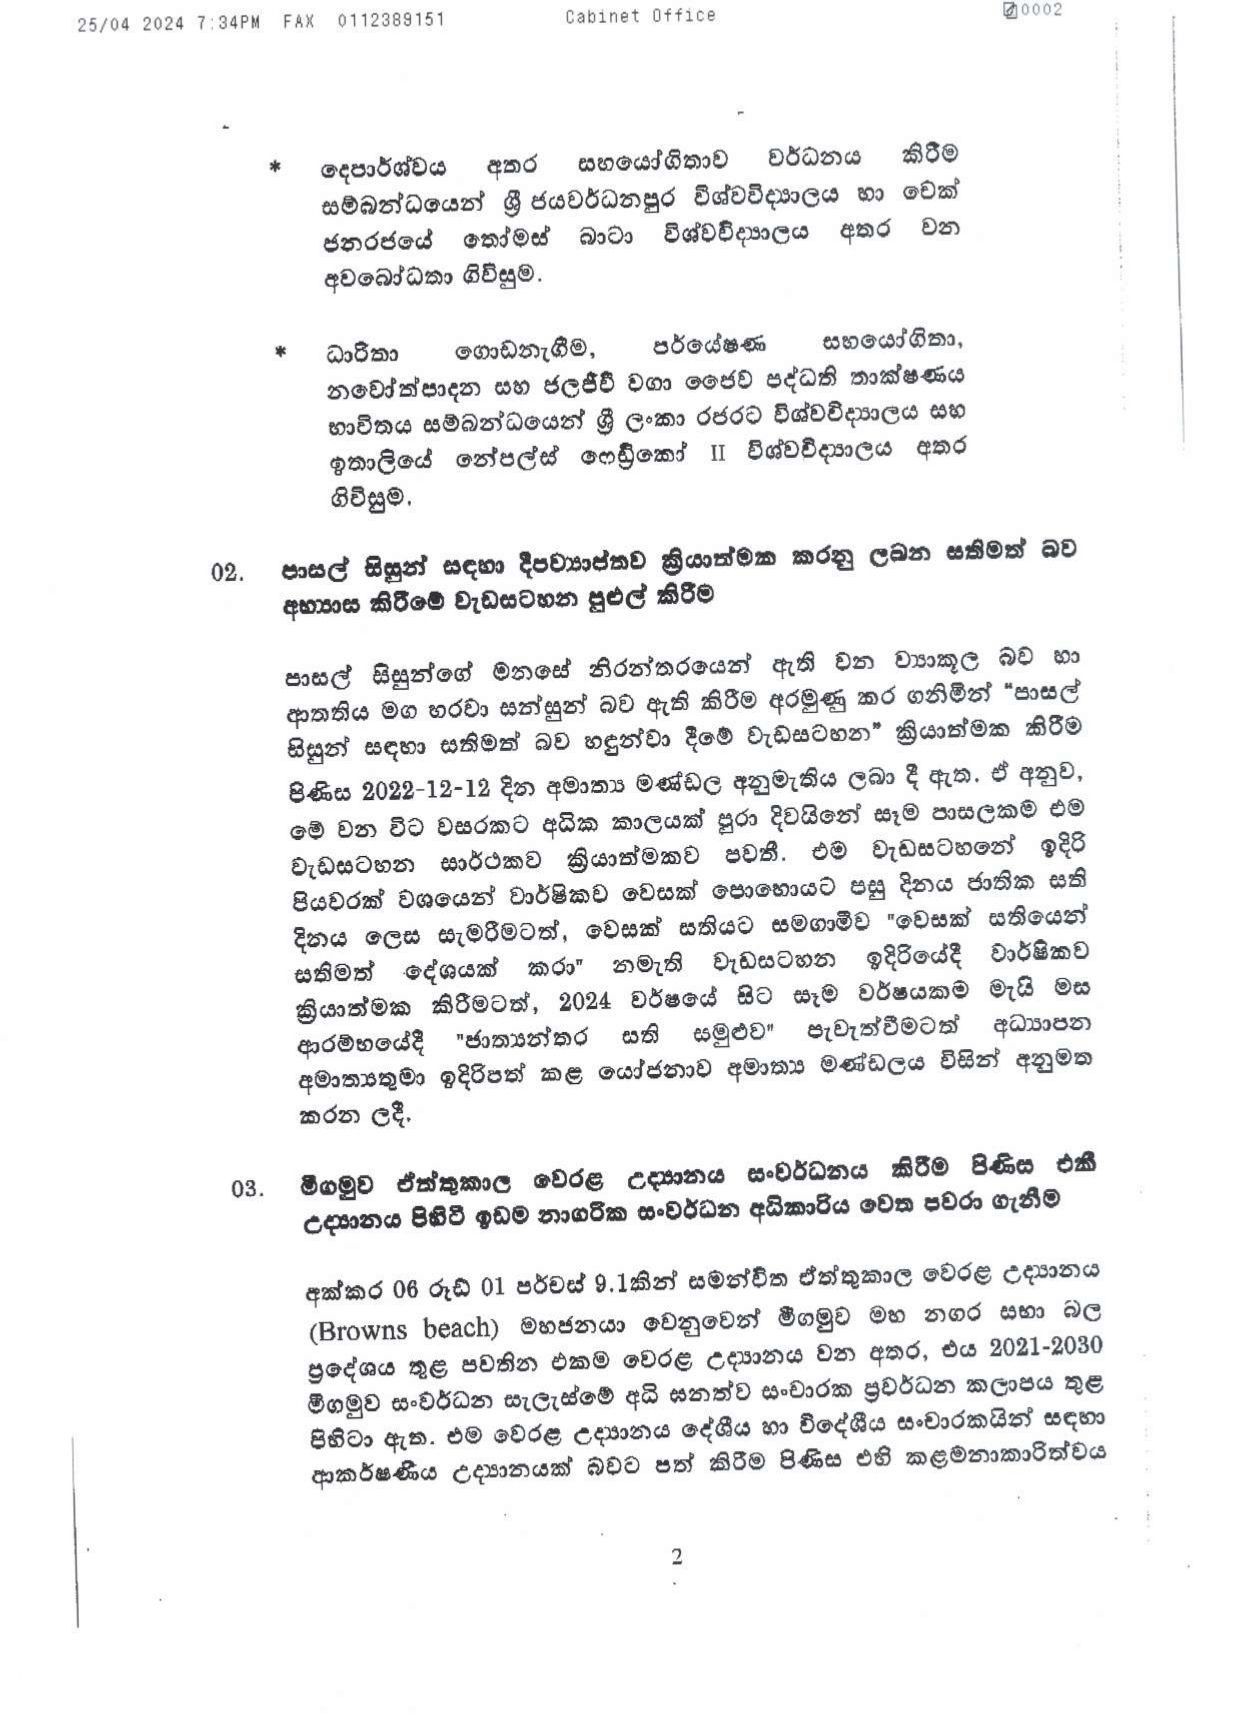 Cabinet Decision on 25.04.2024 page 0002